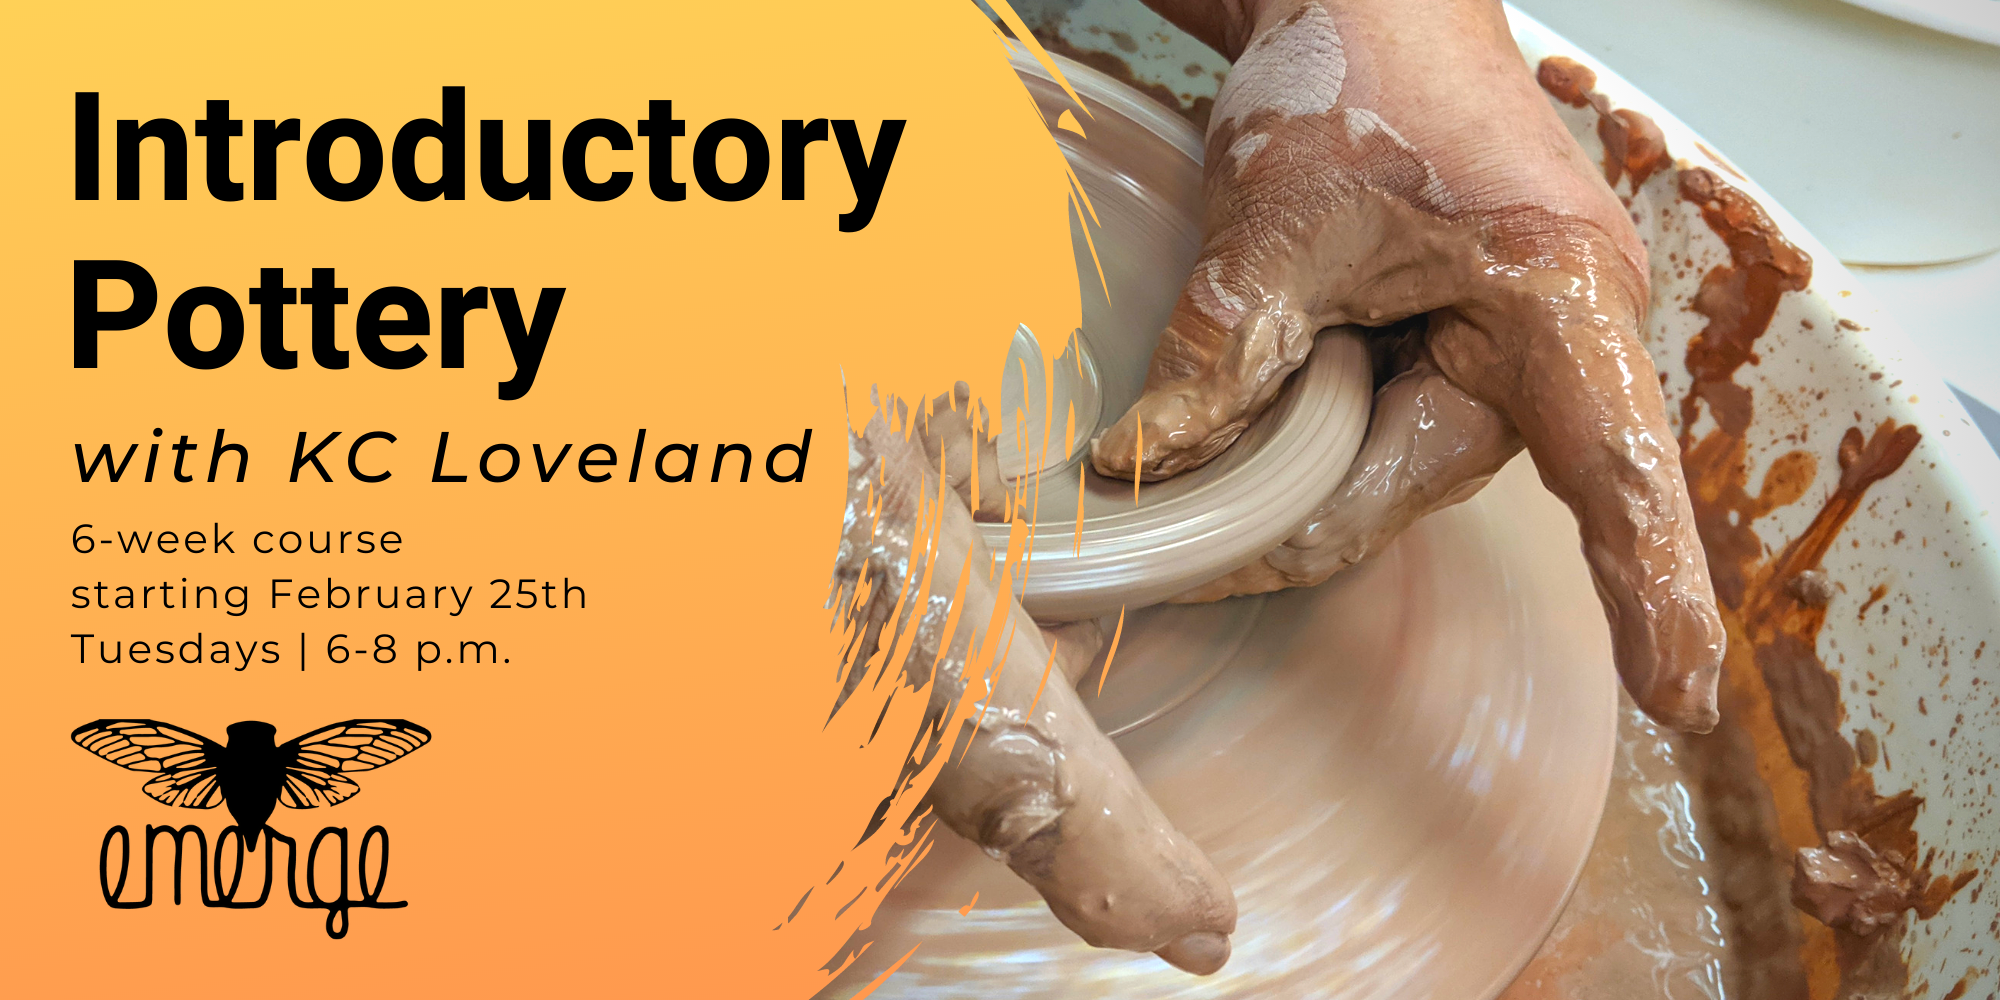 Introductory Pottery with KC Loveland: Tuesday PM